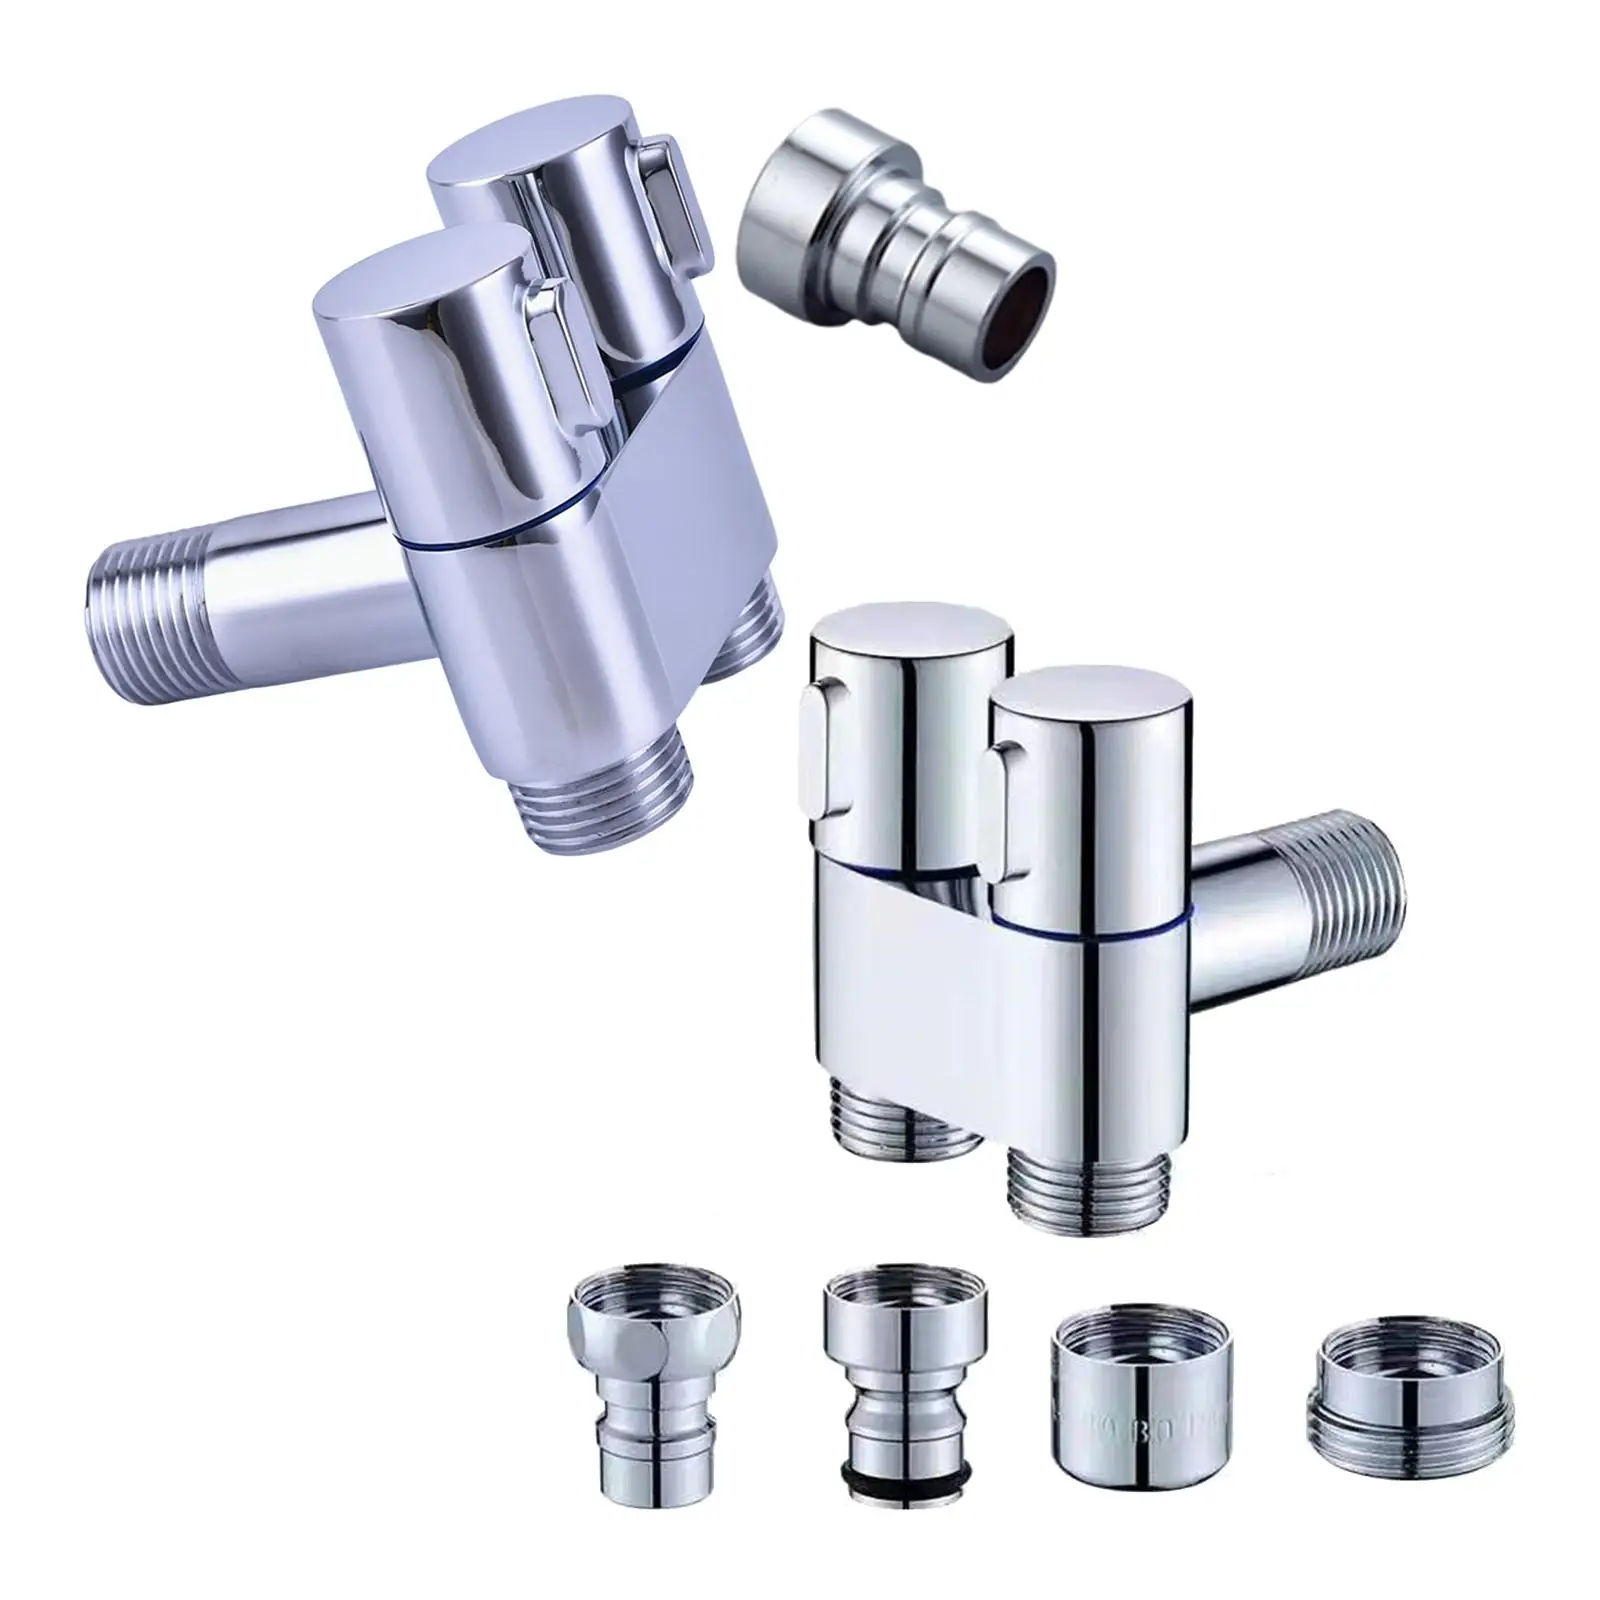 3 Through Angle Stop Valve Hose Connection Faucet Valve G1/2 Thread Filling Valve for Bathroom Cold ,Hot Water Kitchen Bathtub